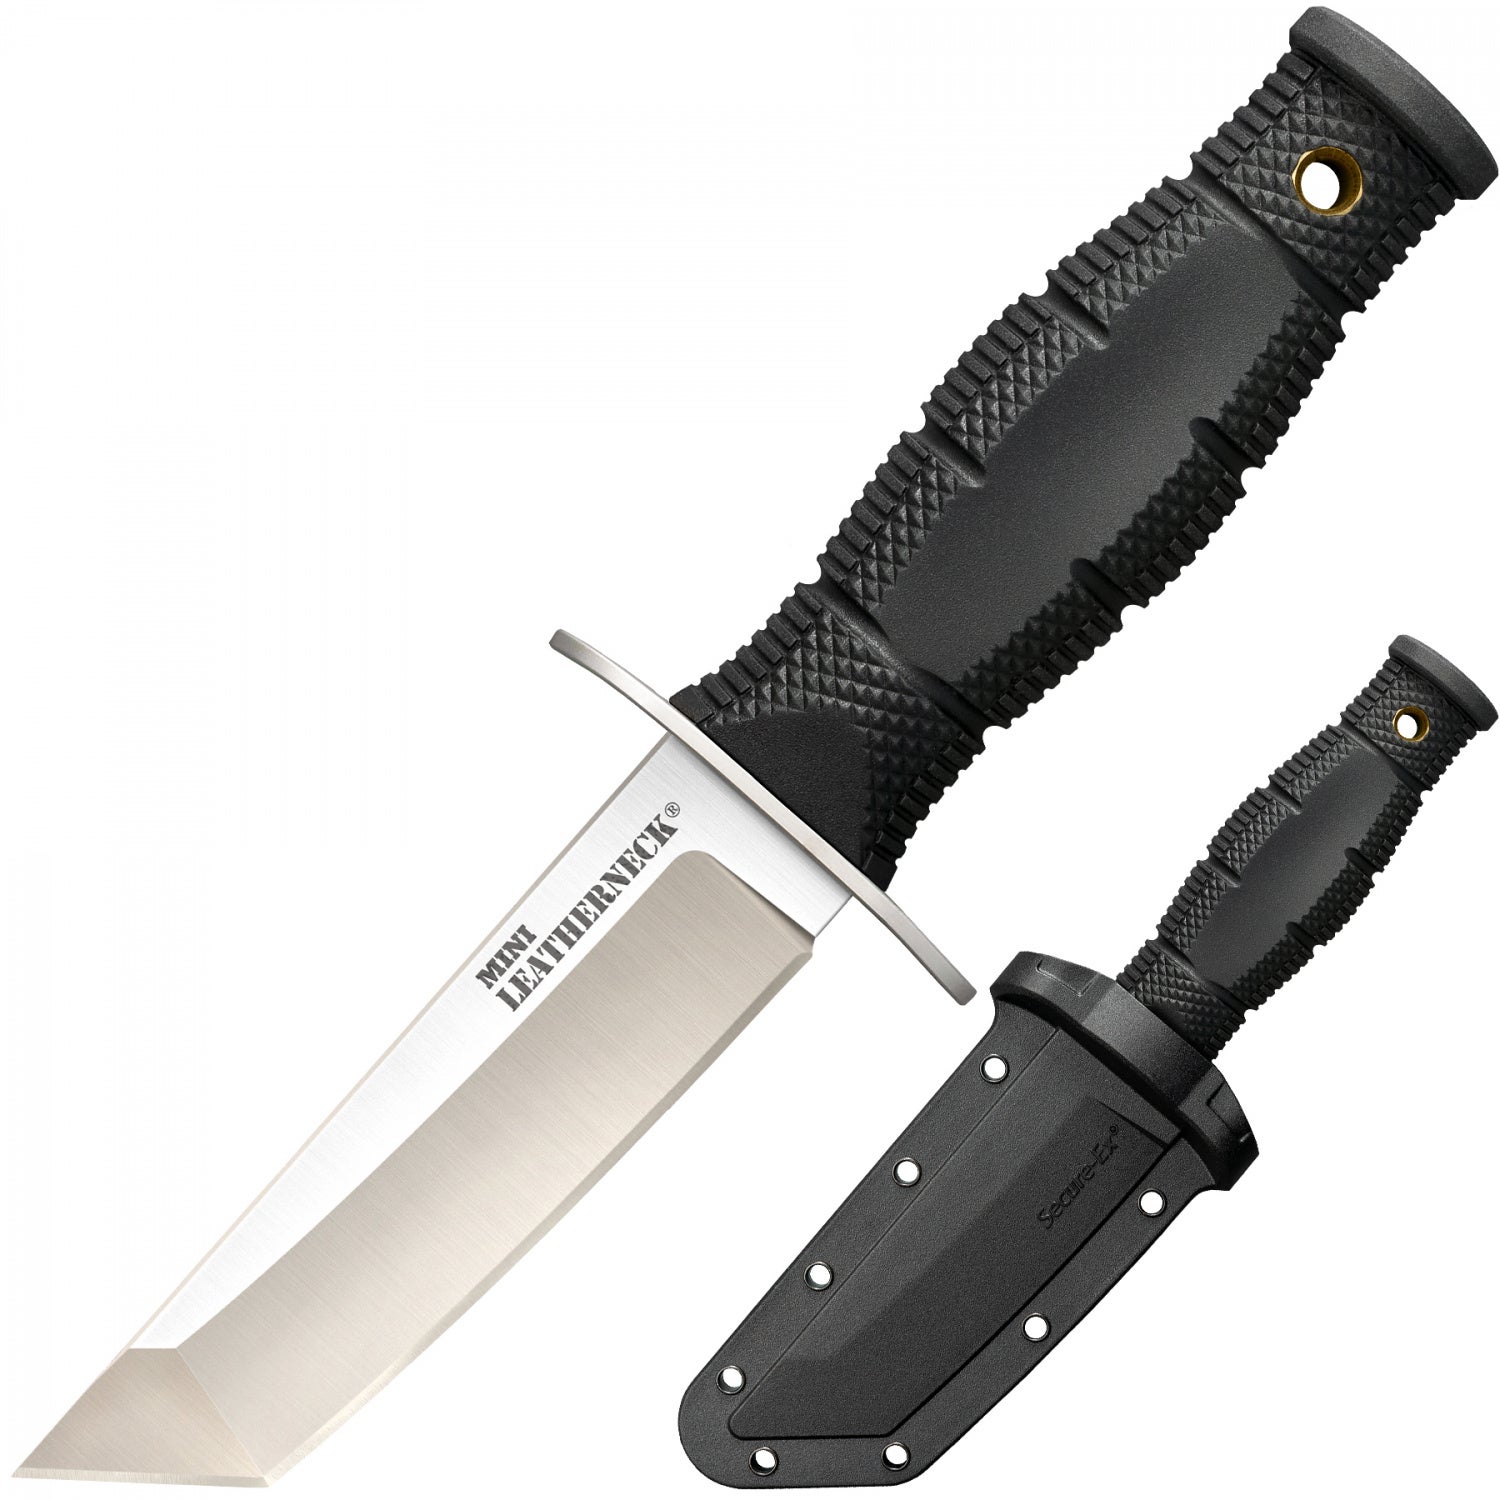 Cold Steel's Reimagining of the Fixed-Blade - The Mini Leatherneck